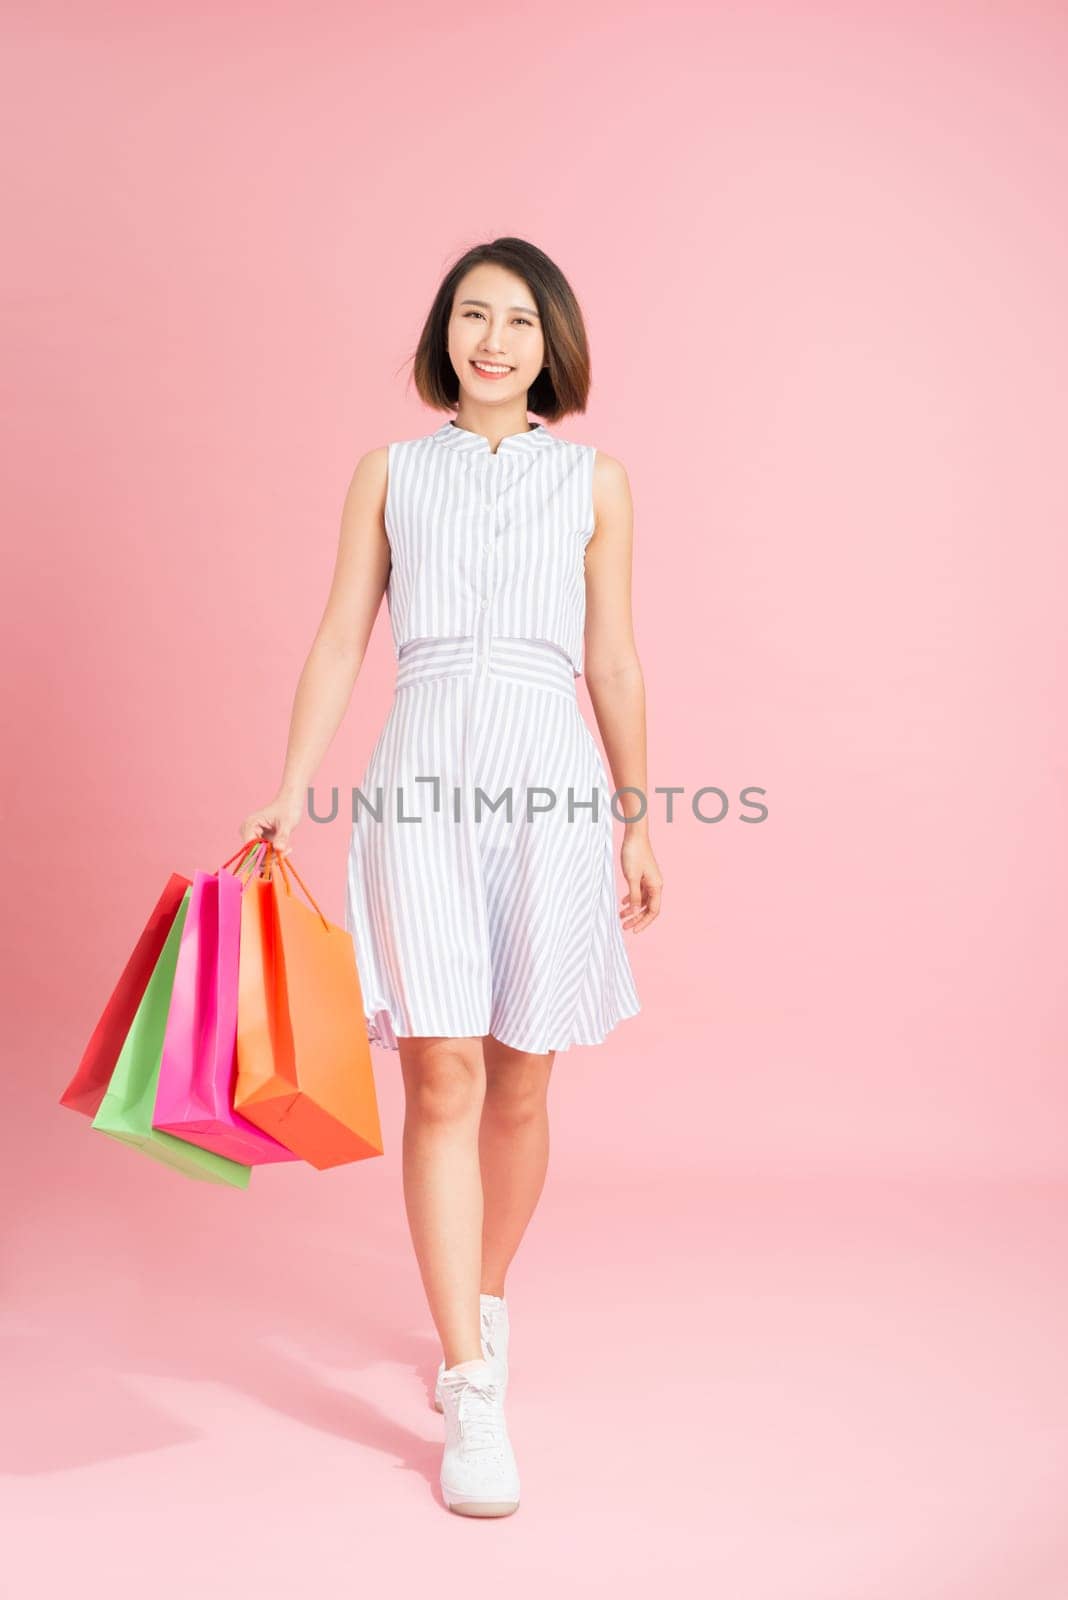 fashionable woman with packages on a pink background by makidotvn